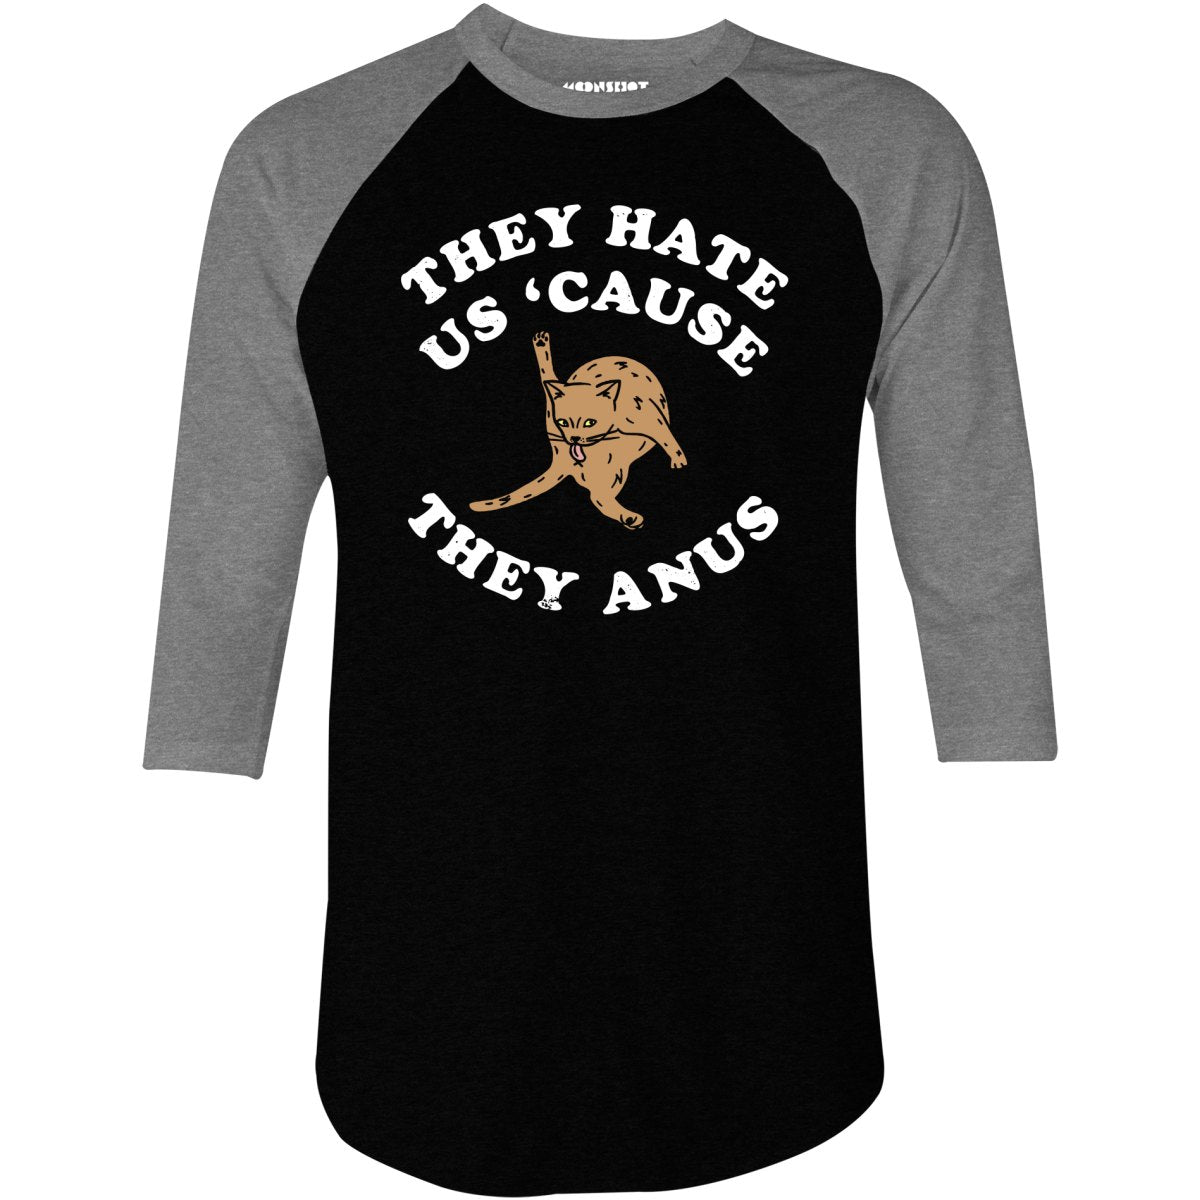 They Hate Us Cause They Anus - 3/4 Sleeve Raglan T-Shirt